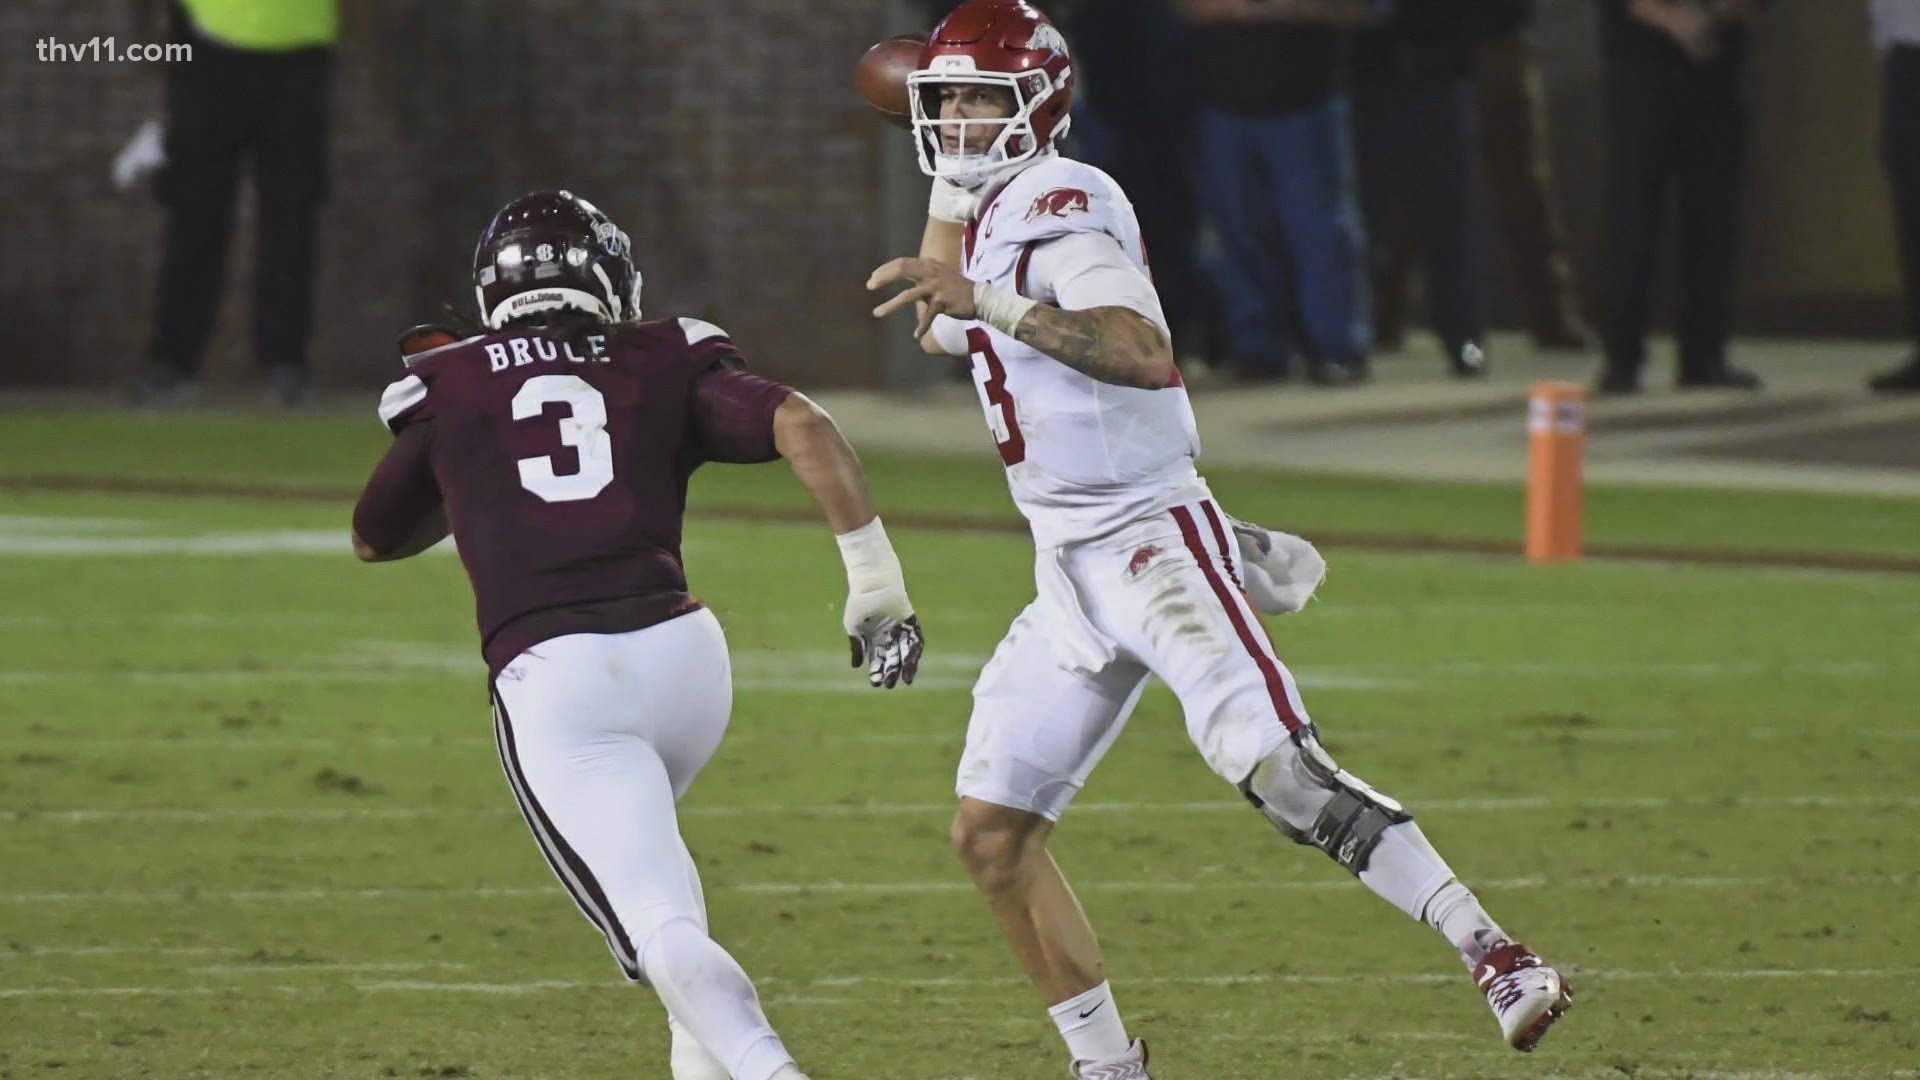 It's not just that Arkansas knocked off No. 16 Mississippi State, it's the way the Razorbacks won that show this team could be the start of something special